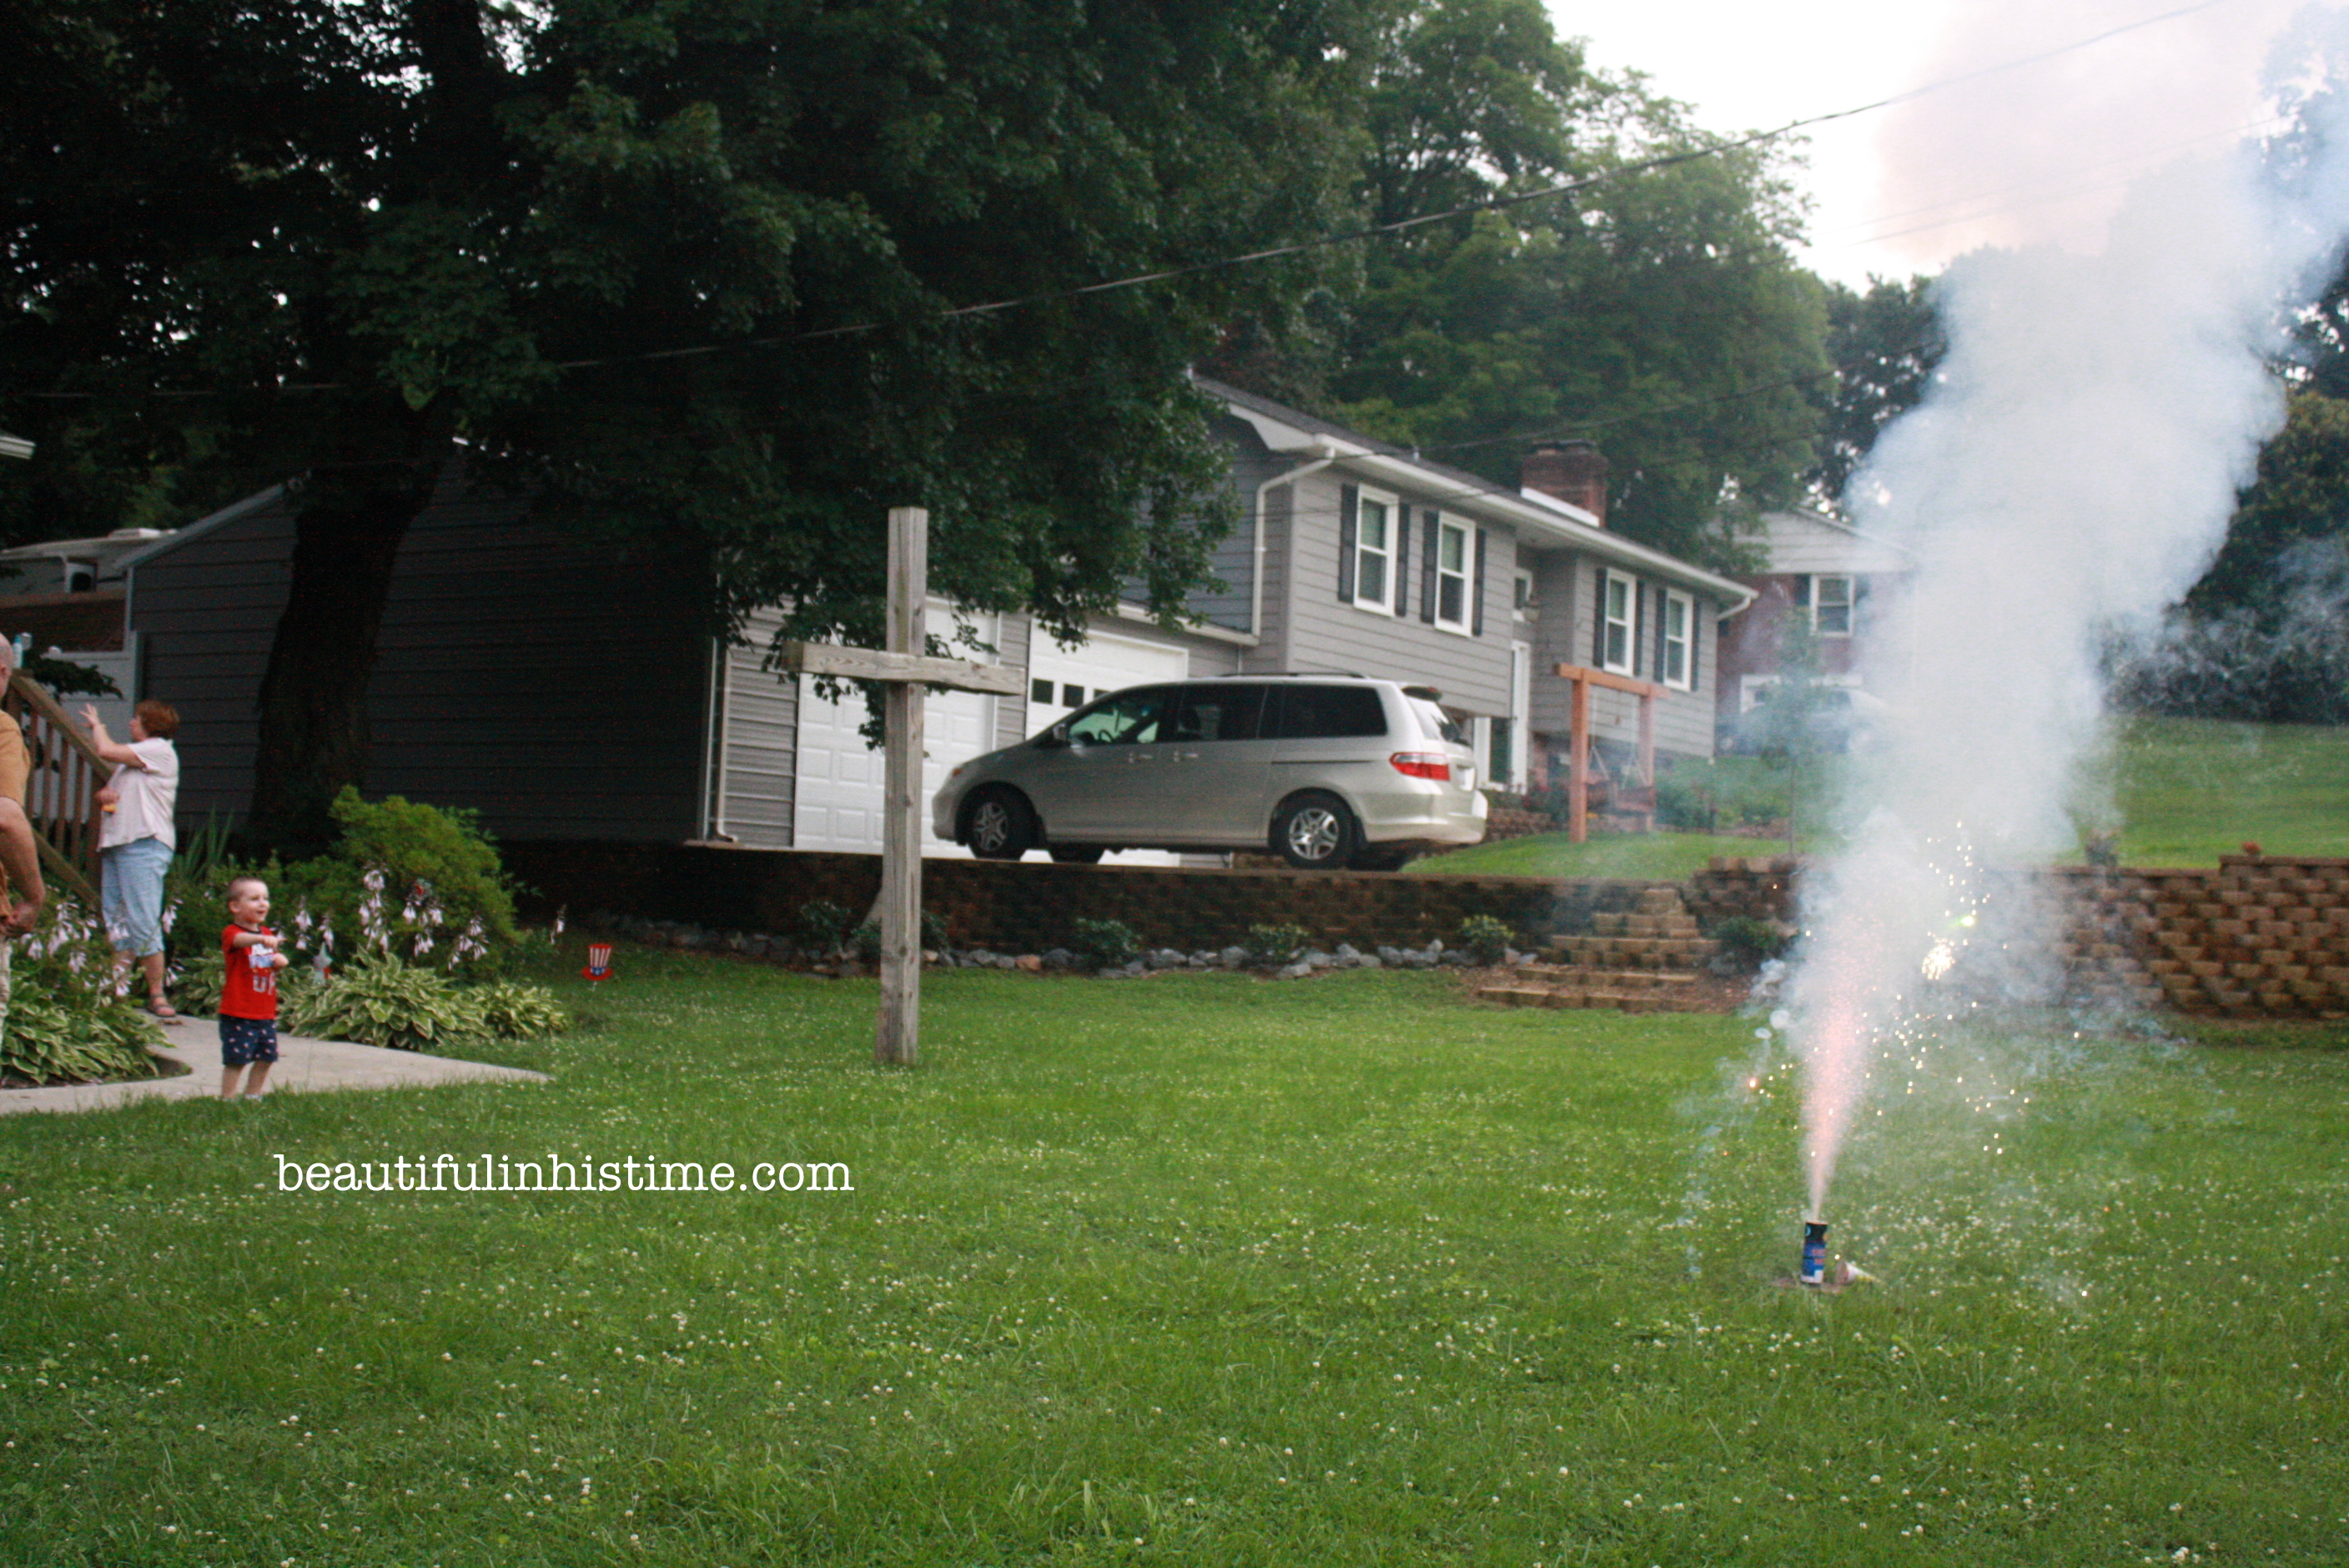 fireworks with grandpa A Birthday Party for America! #birthday #america #4thofjuly #independenceday #party #birthdayparty